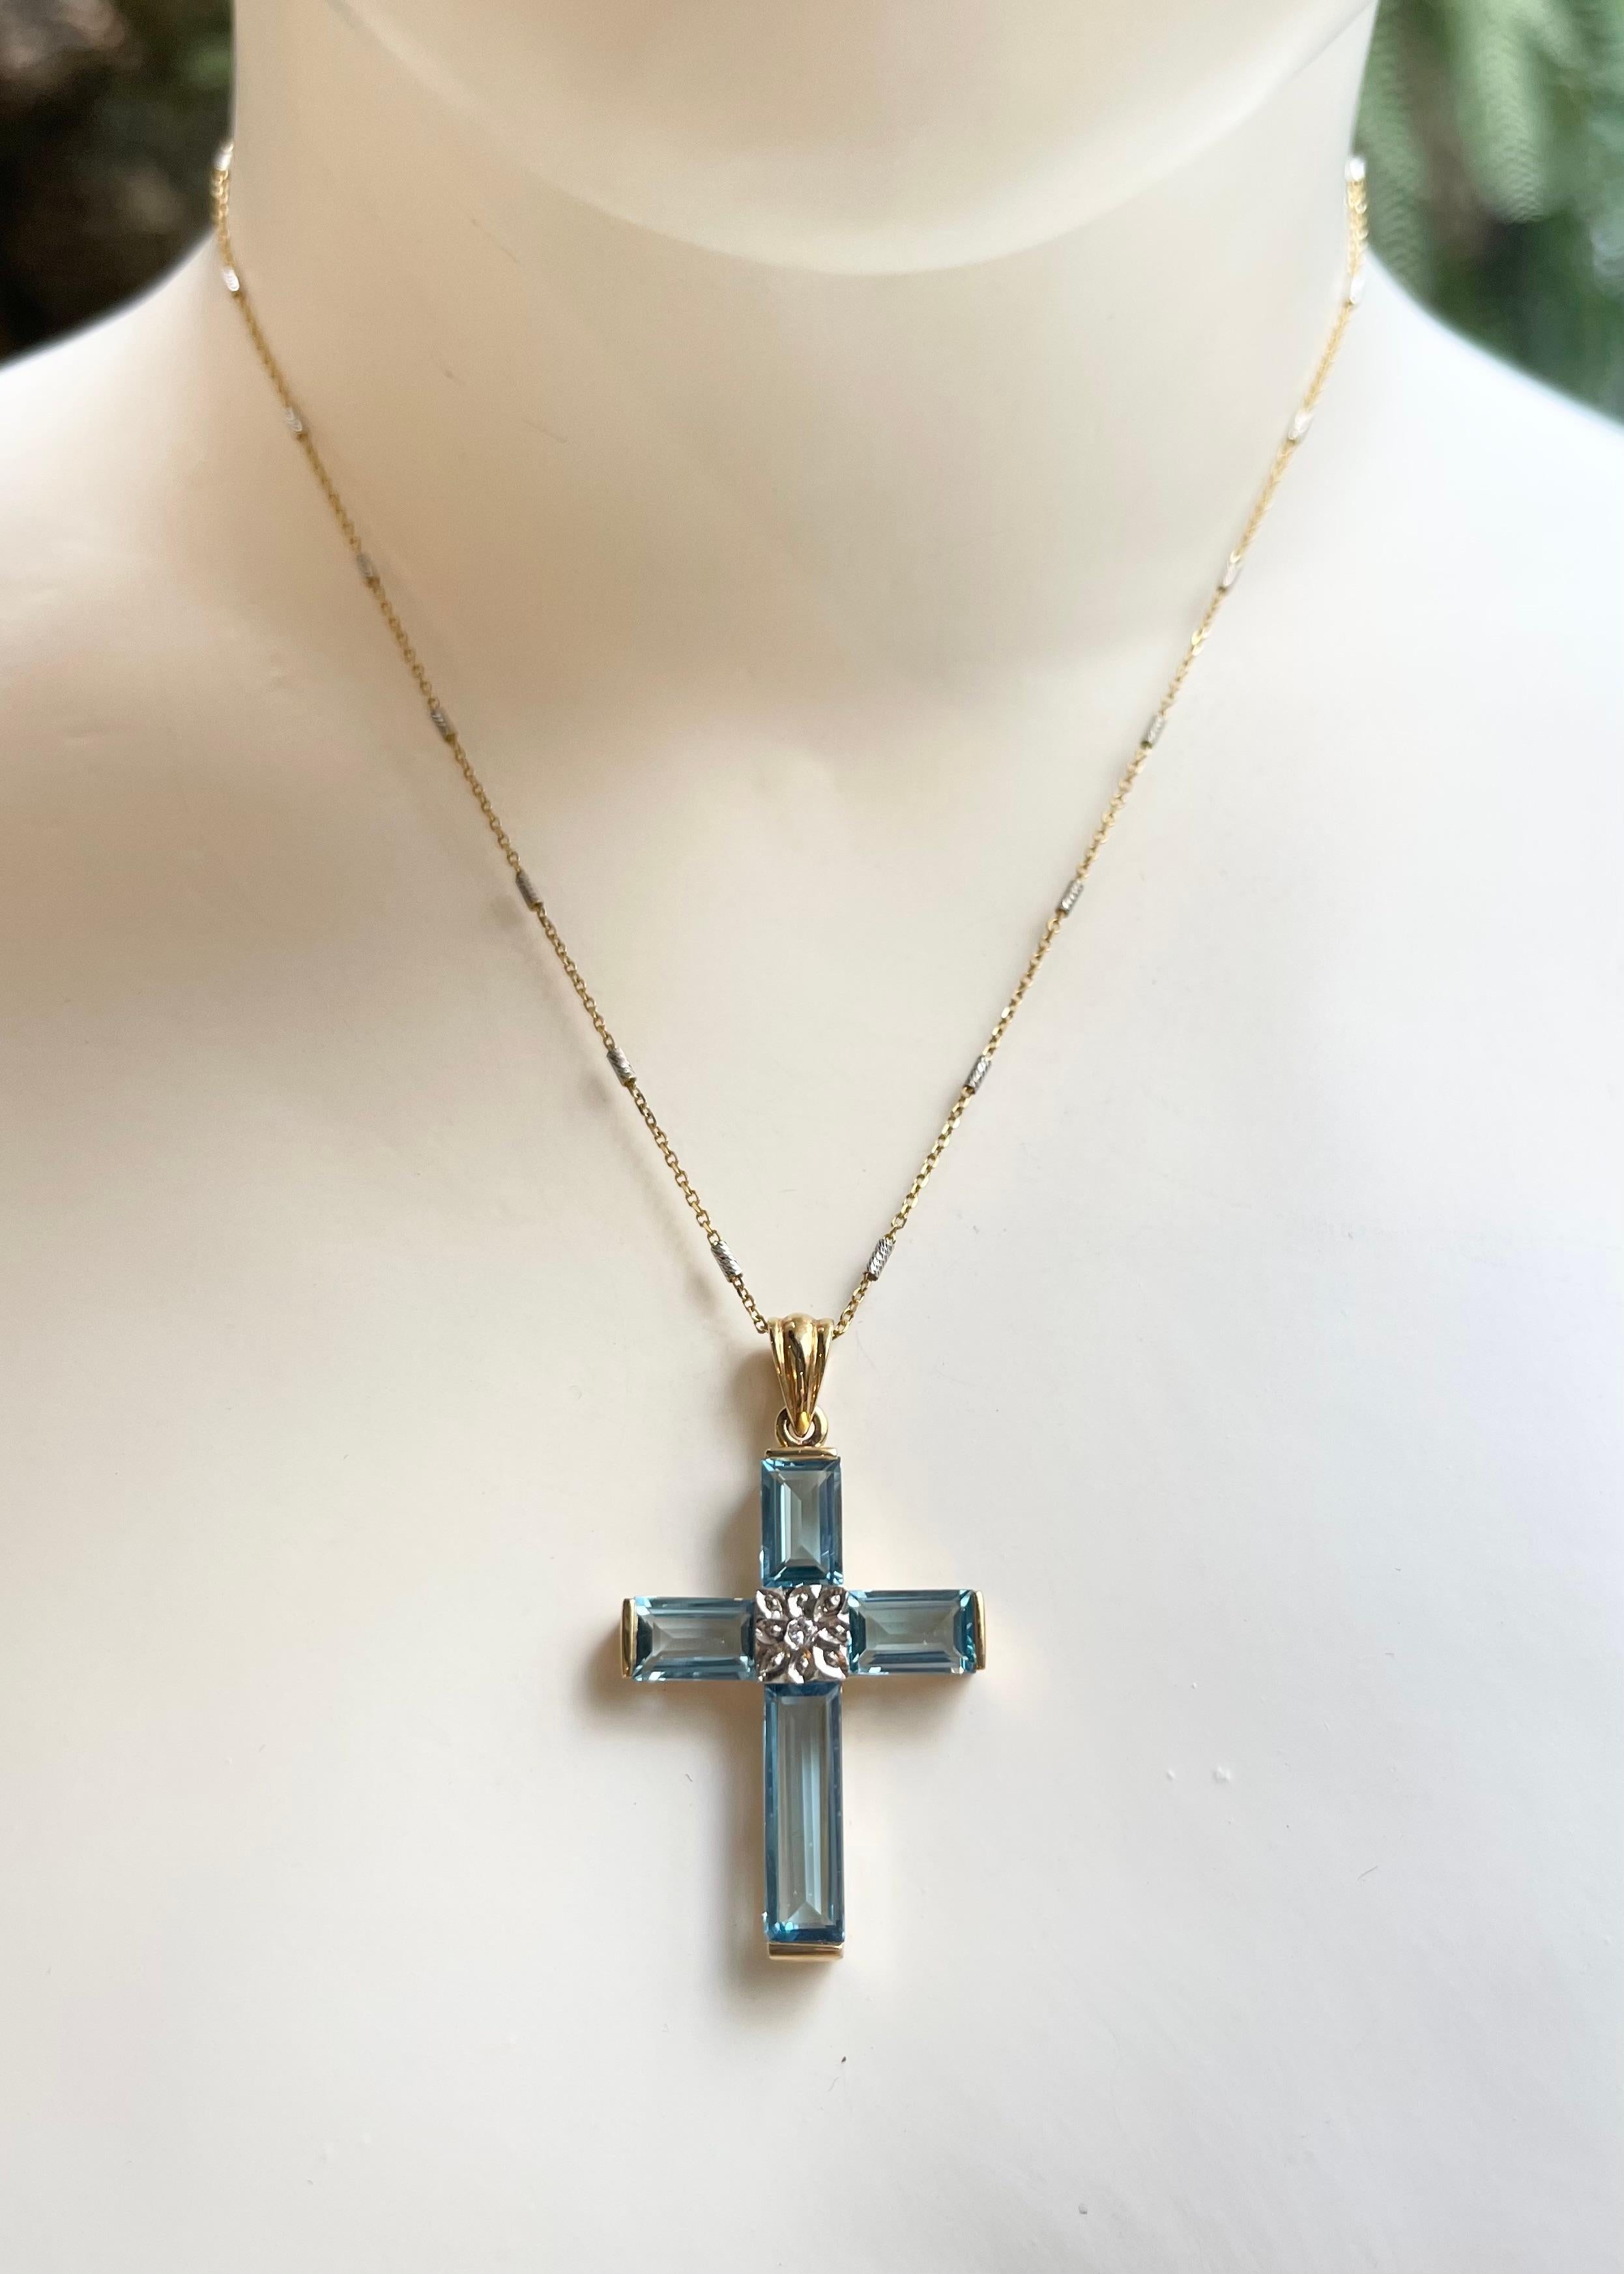 Blue Topaz 7.20 carats with Diamond 0.03 carat Cross Pendant set in 14K Gold Settings
(chain not included)

Width: 2.2 cm 
Length: 4.0 cm
Total Weight: 6.15 grams

